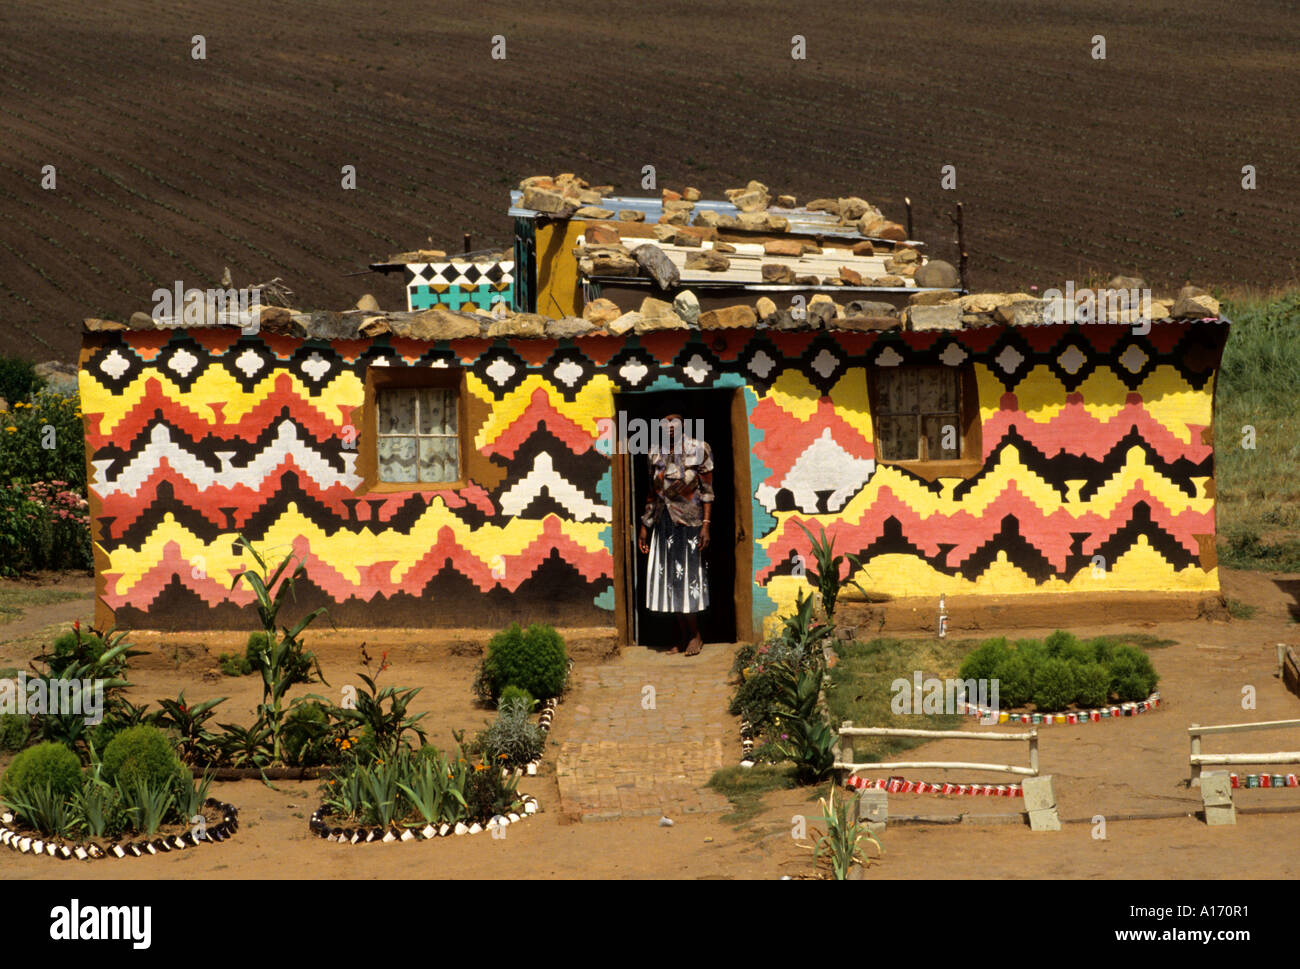 South Africa Ndebele house Orange Free State woman Stock Photo